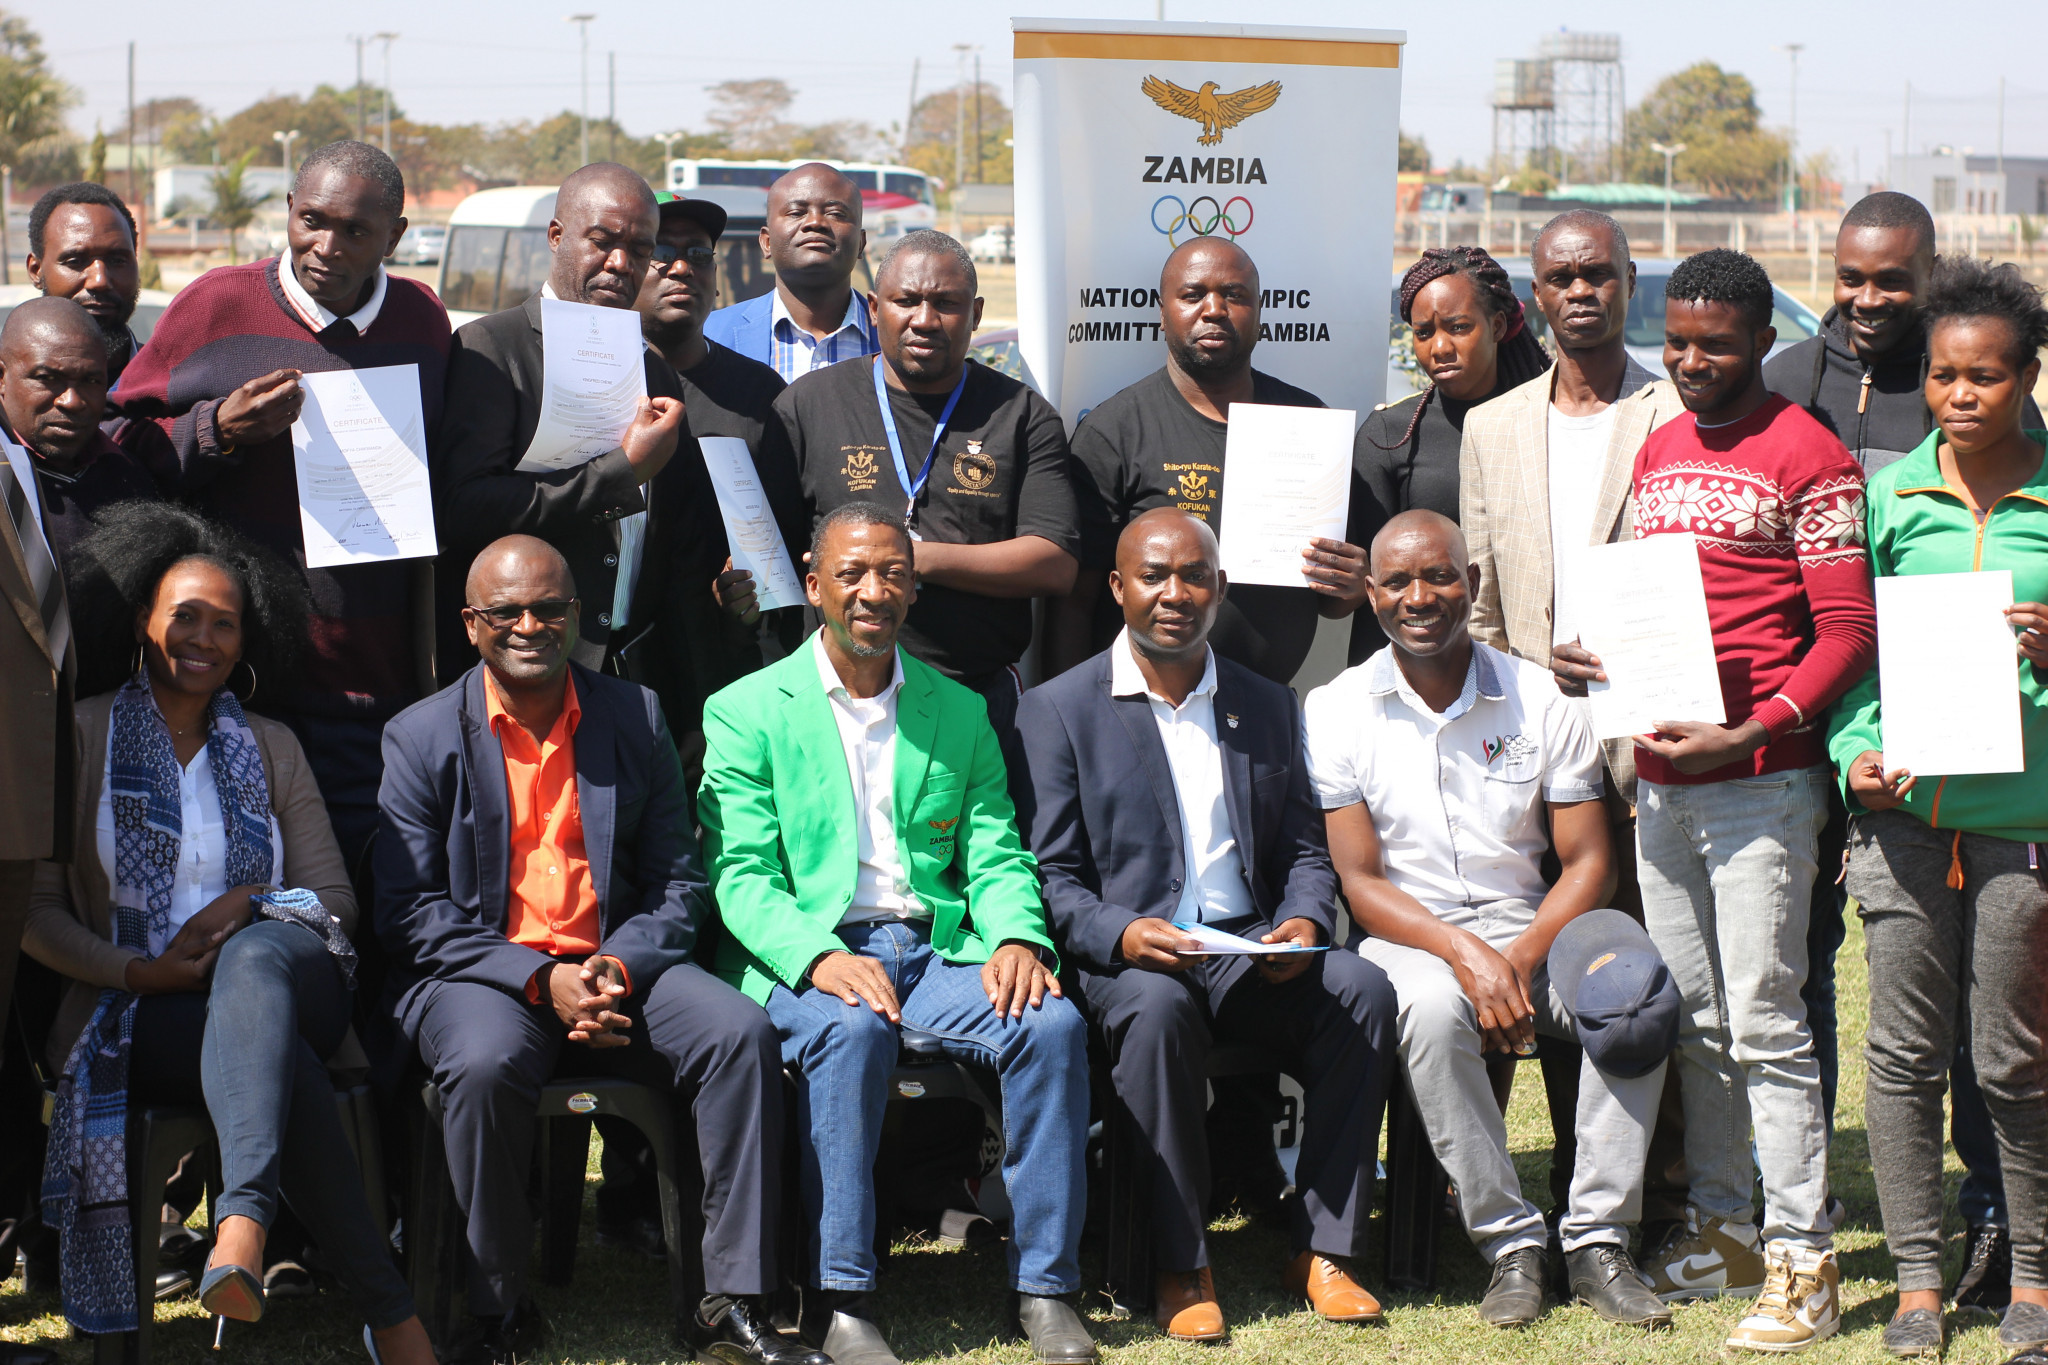 The event in Lusaka was attended by 24 participants, including athletes ©NOCZ